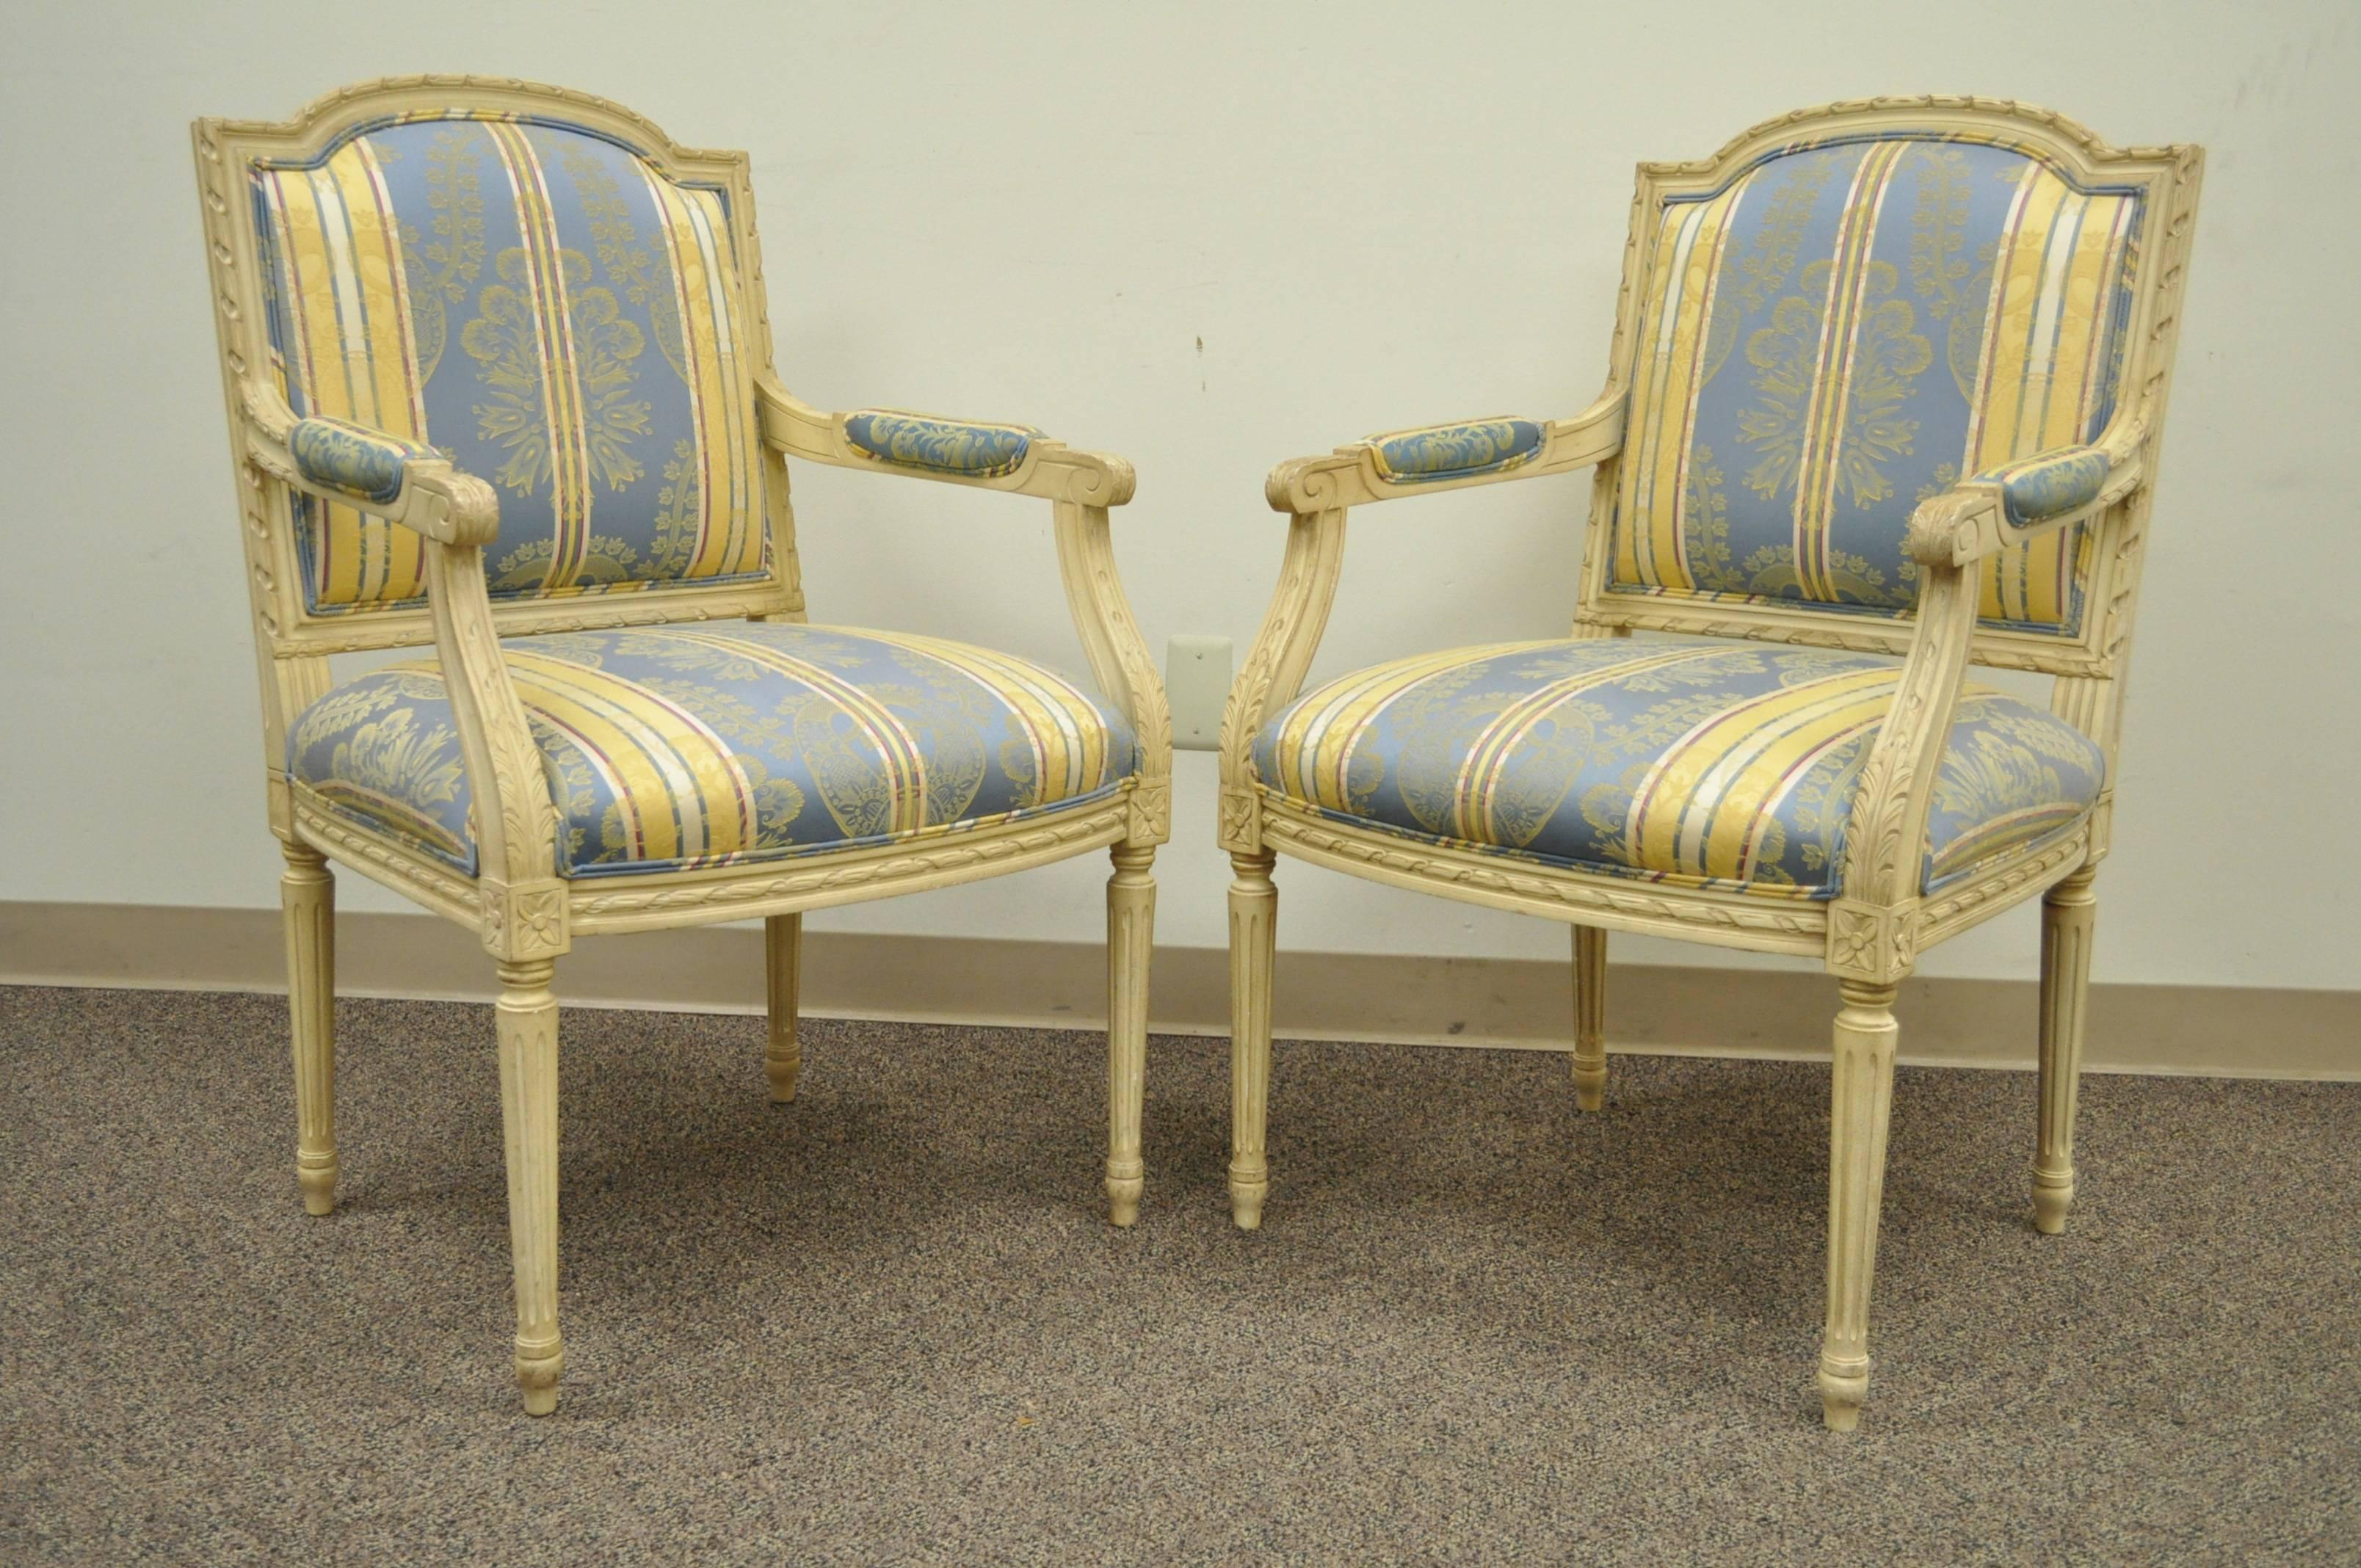 Pair of 20th Century French Louis XVI style armchairs with finely carved floral and ribbon form accents, scroll form arms, and reeded and tapered column form legs. The chairs are upholstered in an absolutely lovely blue and yellow striped fabric